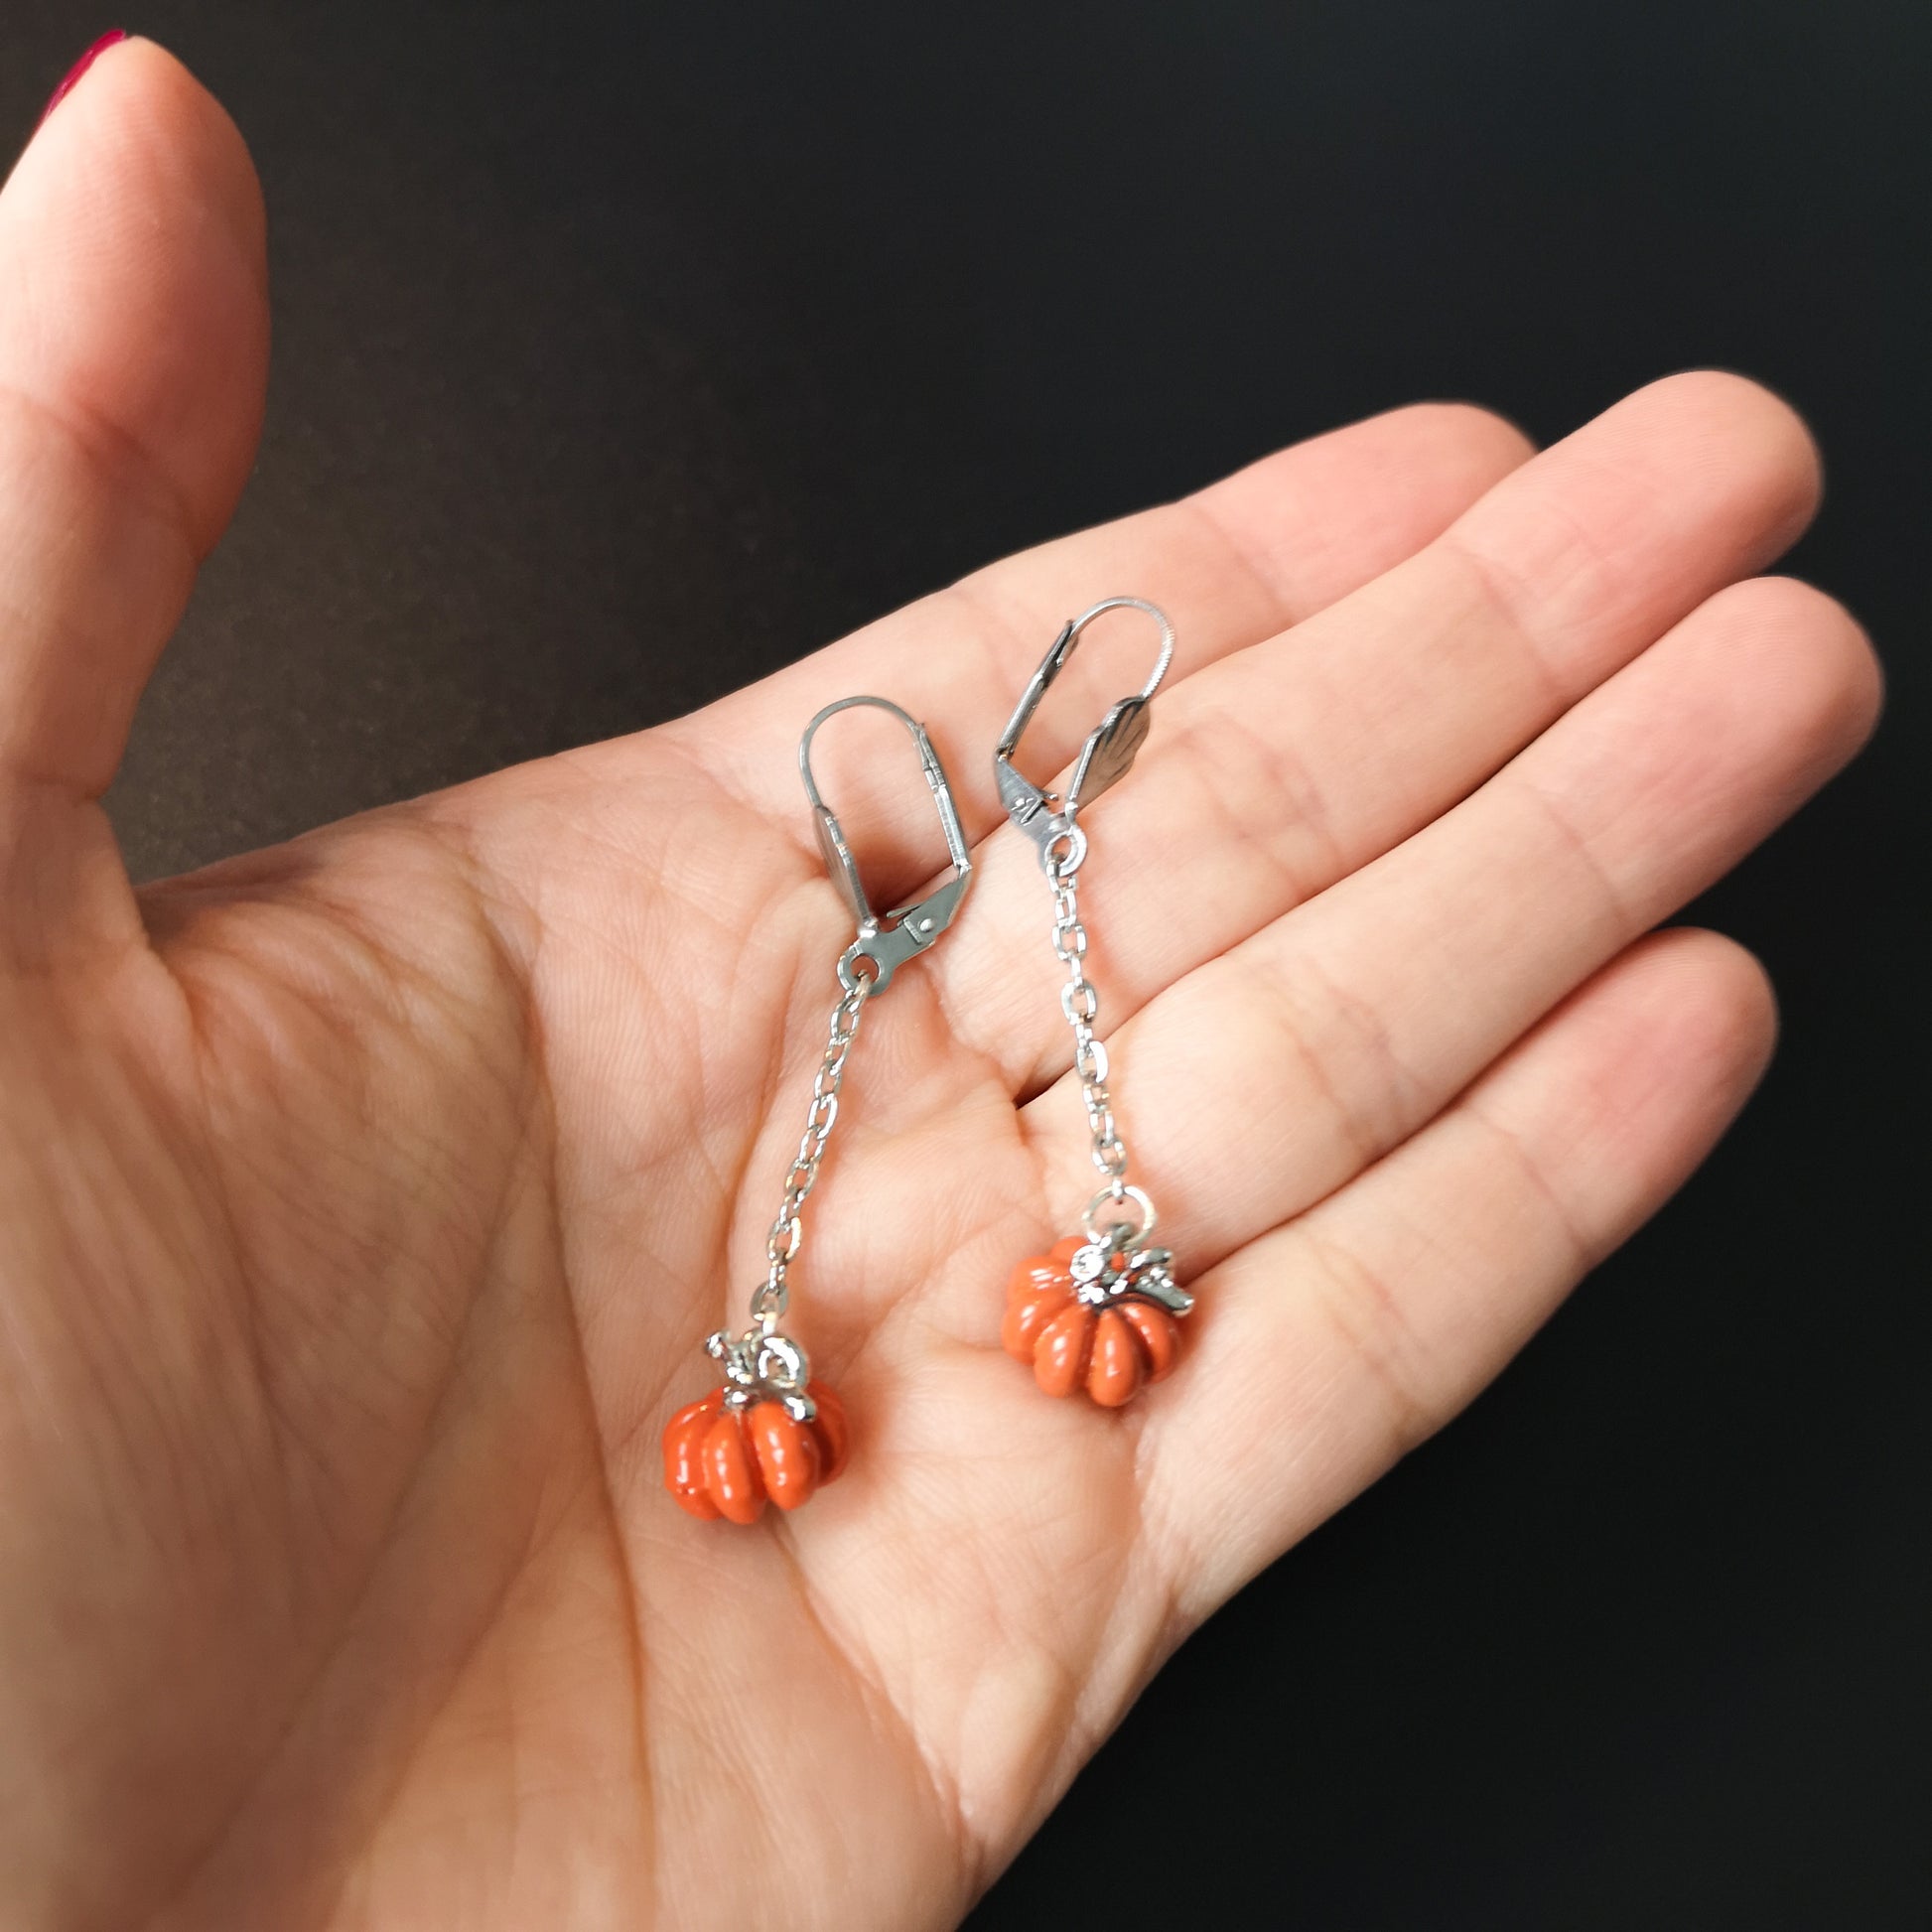 Adorable tiny pumpkins Halloween earrings - The French Witch shop